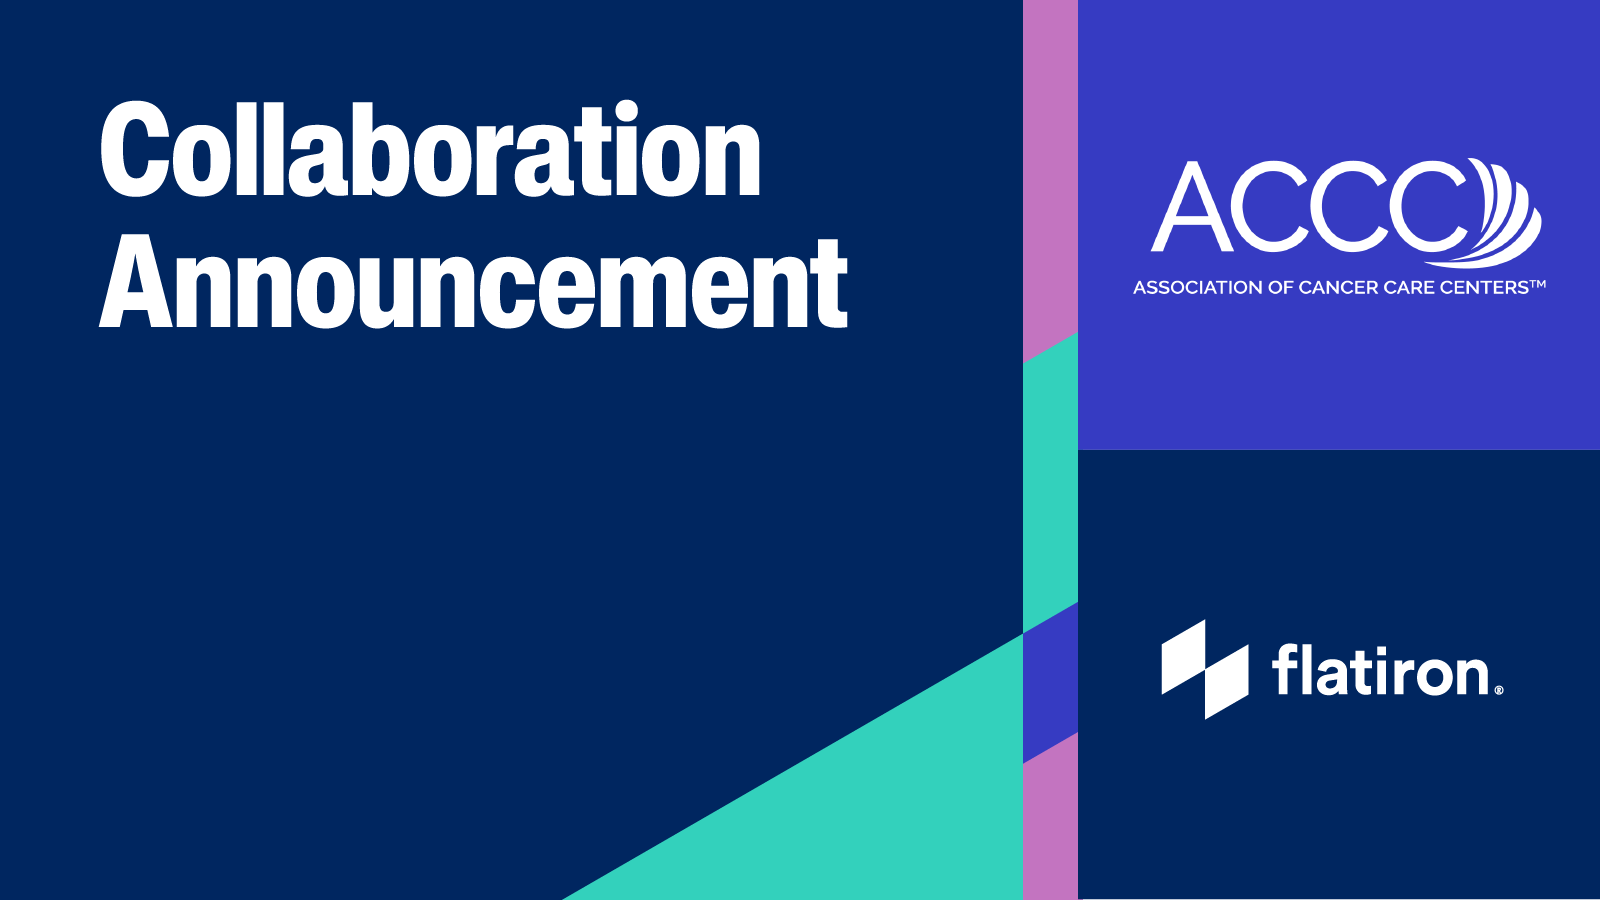 The Association of Cancer Care Centers and Flatiron Health announce a strategic collaboration to improve study data capture